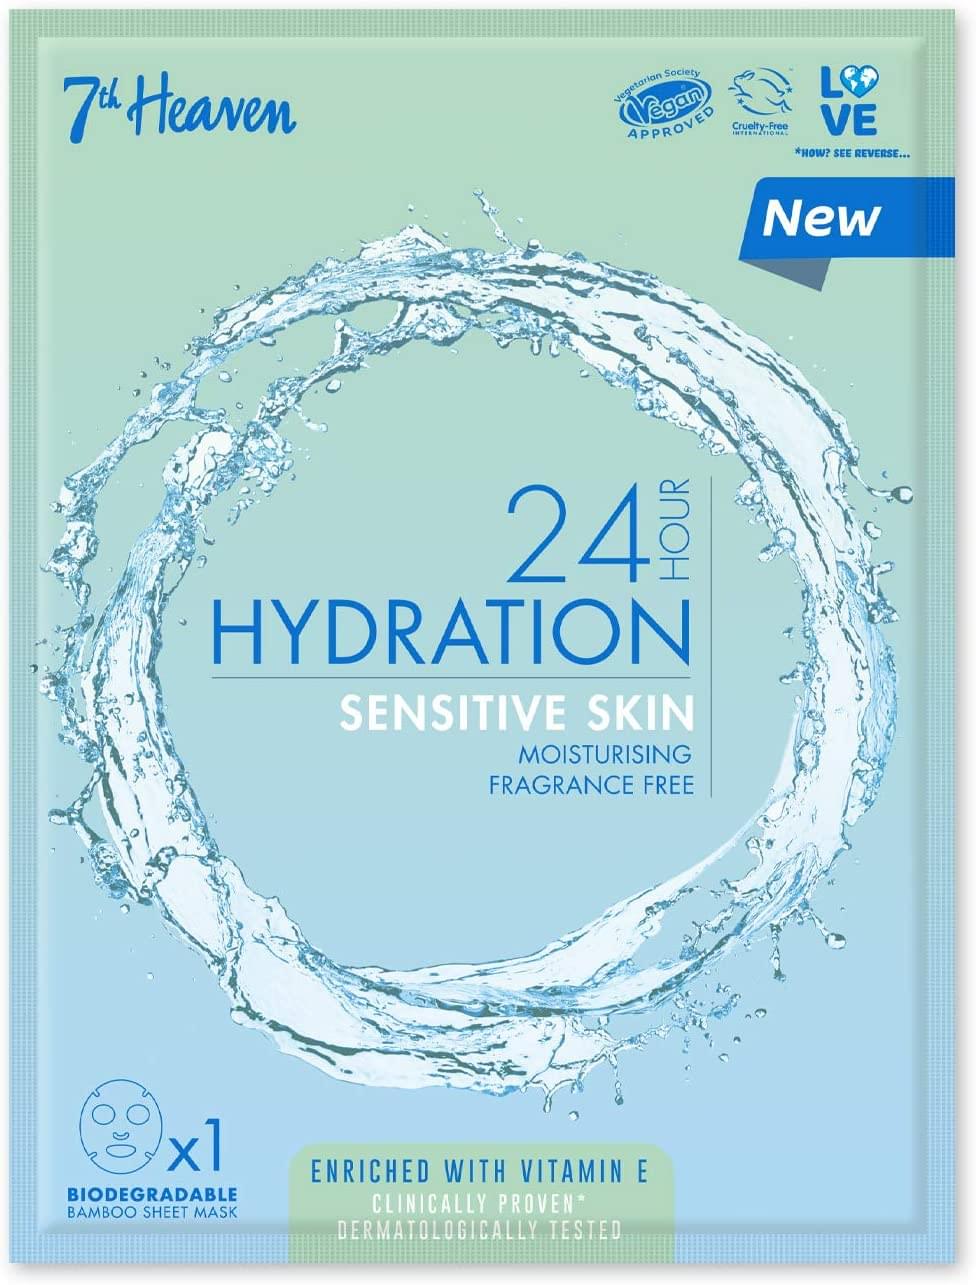 7th Heaven 24h Hydration Sensitive Skin Sheet Mask 16g for Sensitive Skin Moisturising Fragrance Free Enriched with Vitamin E Clinically Proven Dermatologically Tested